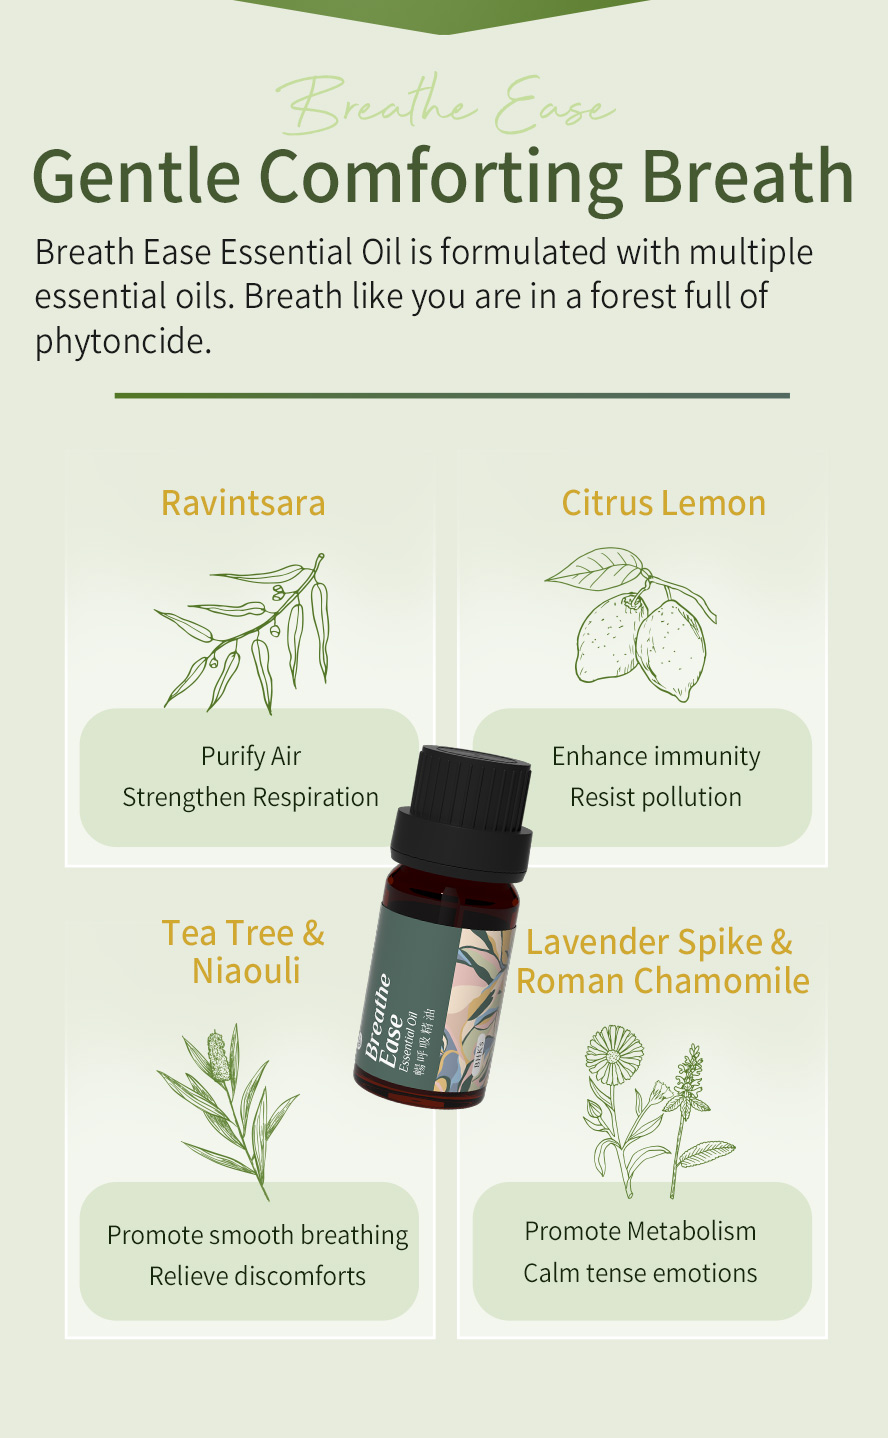 BHK's Breathe Ease Essential Oil is formulated with various of 100% pure natural essential oils